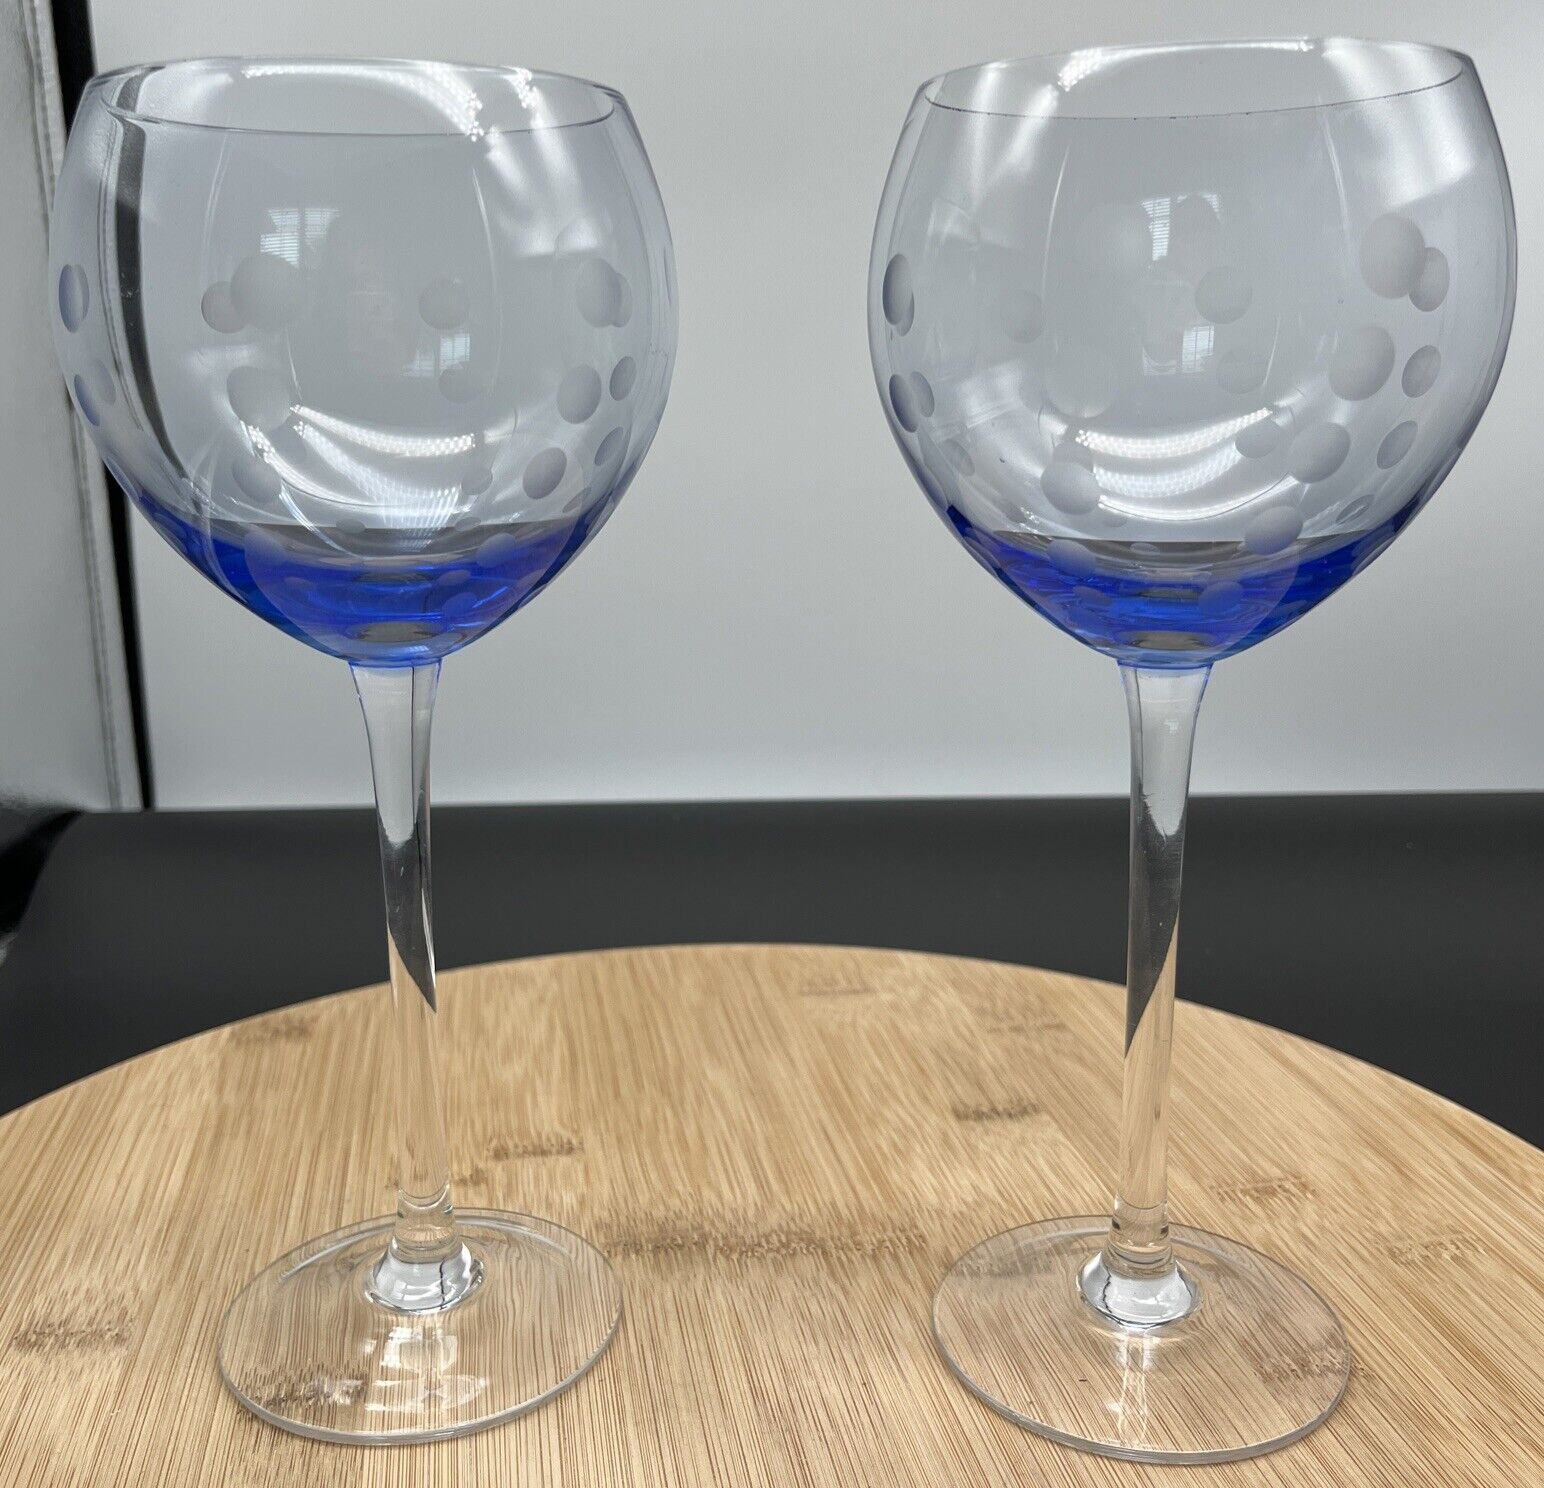 Beautiful Pair Of Blue Bohemian Balloon Style Wine Glasses Etched W/ Polka Dots